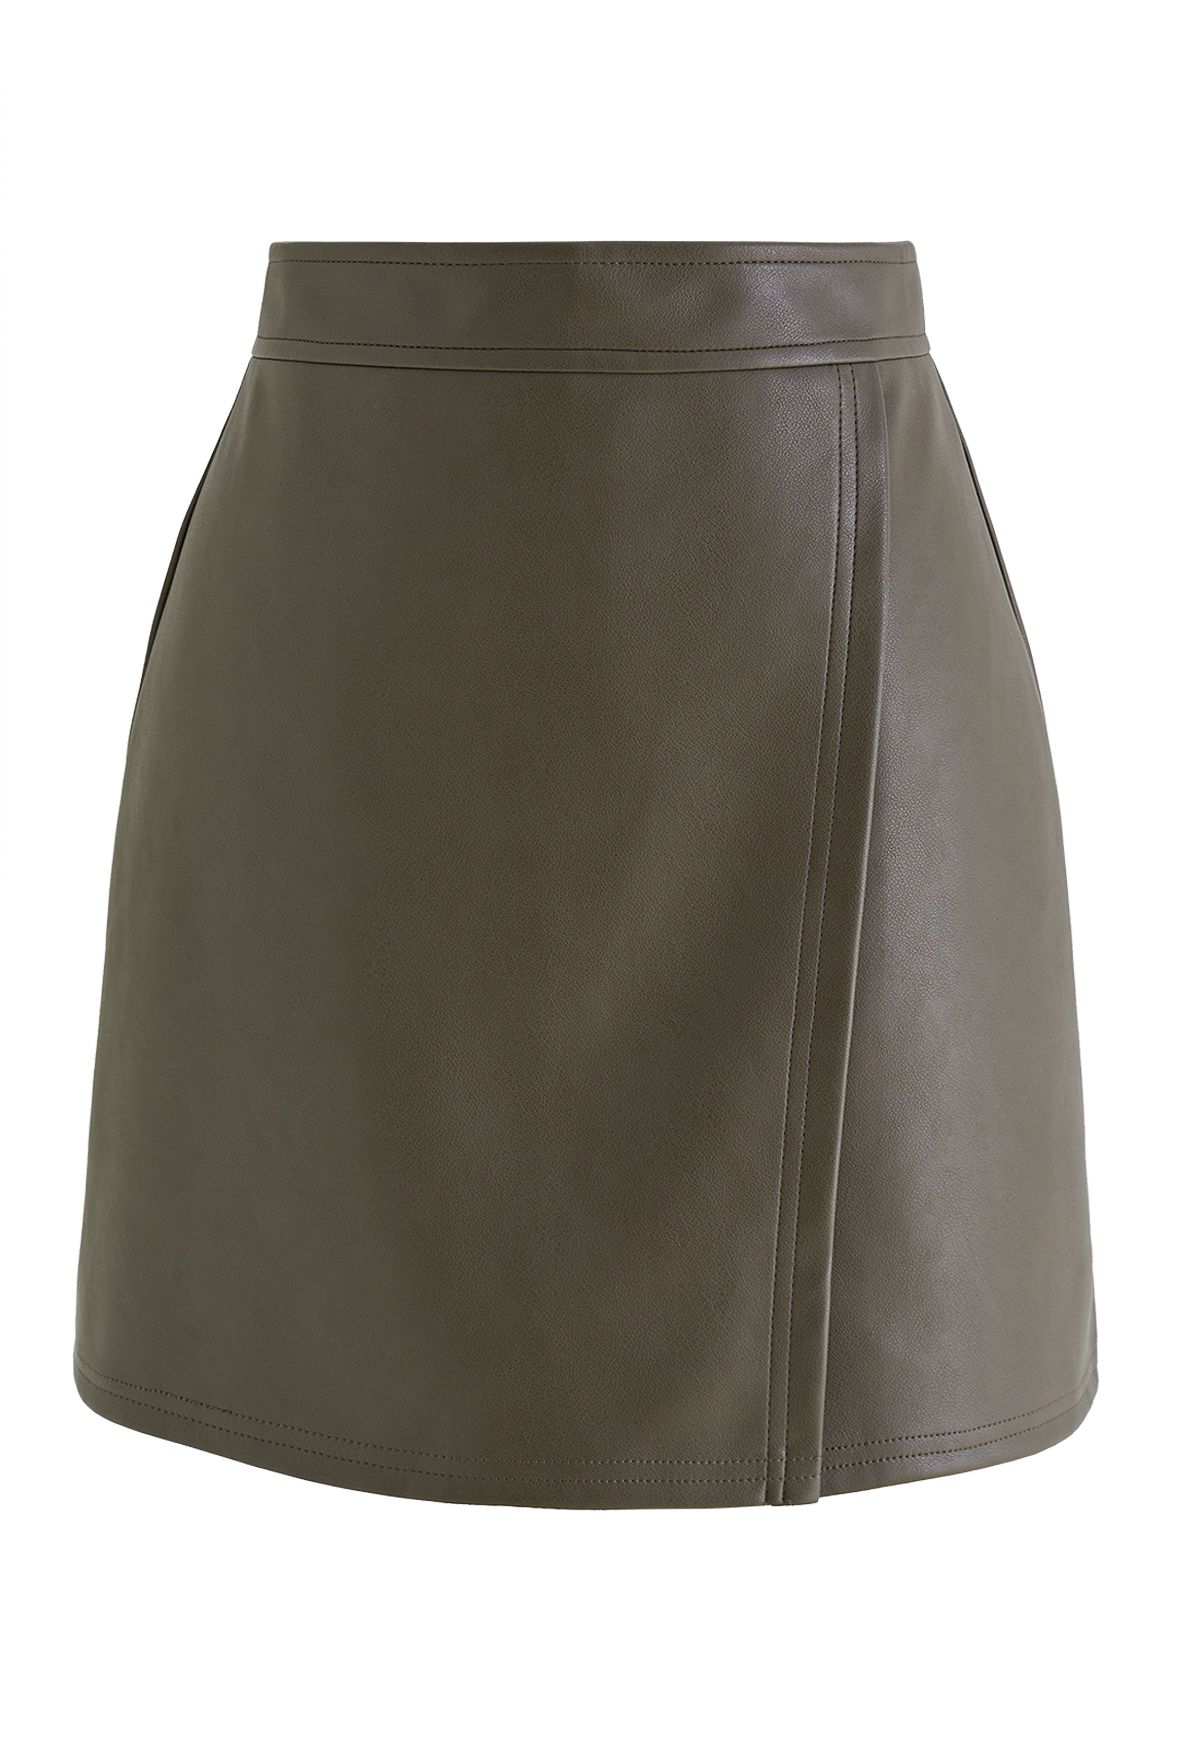 Nifty Faux Leather Flap Mini Bud Skirt in Olive